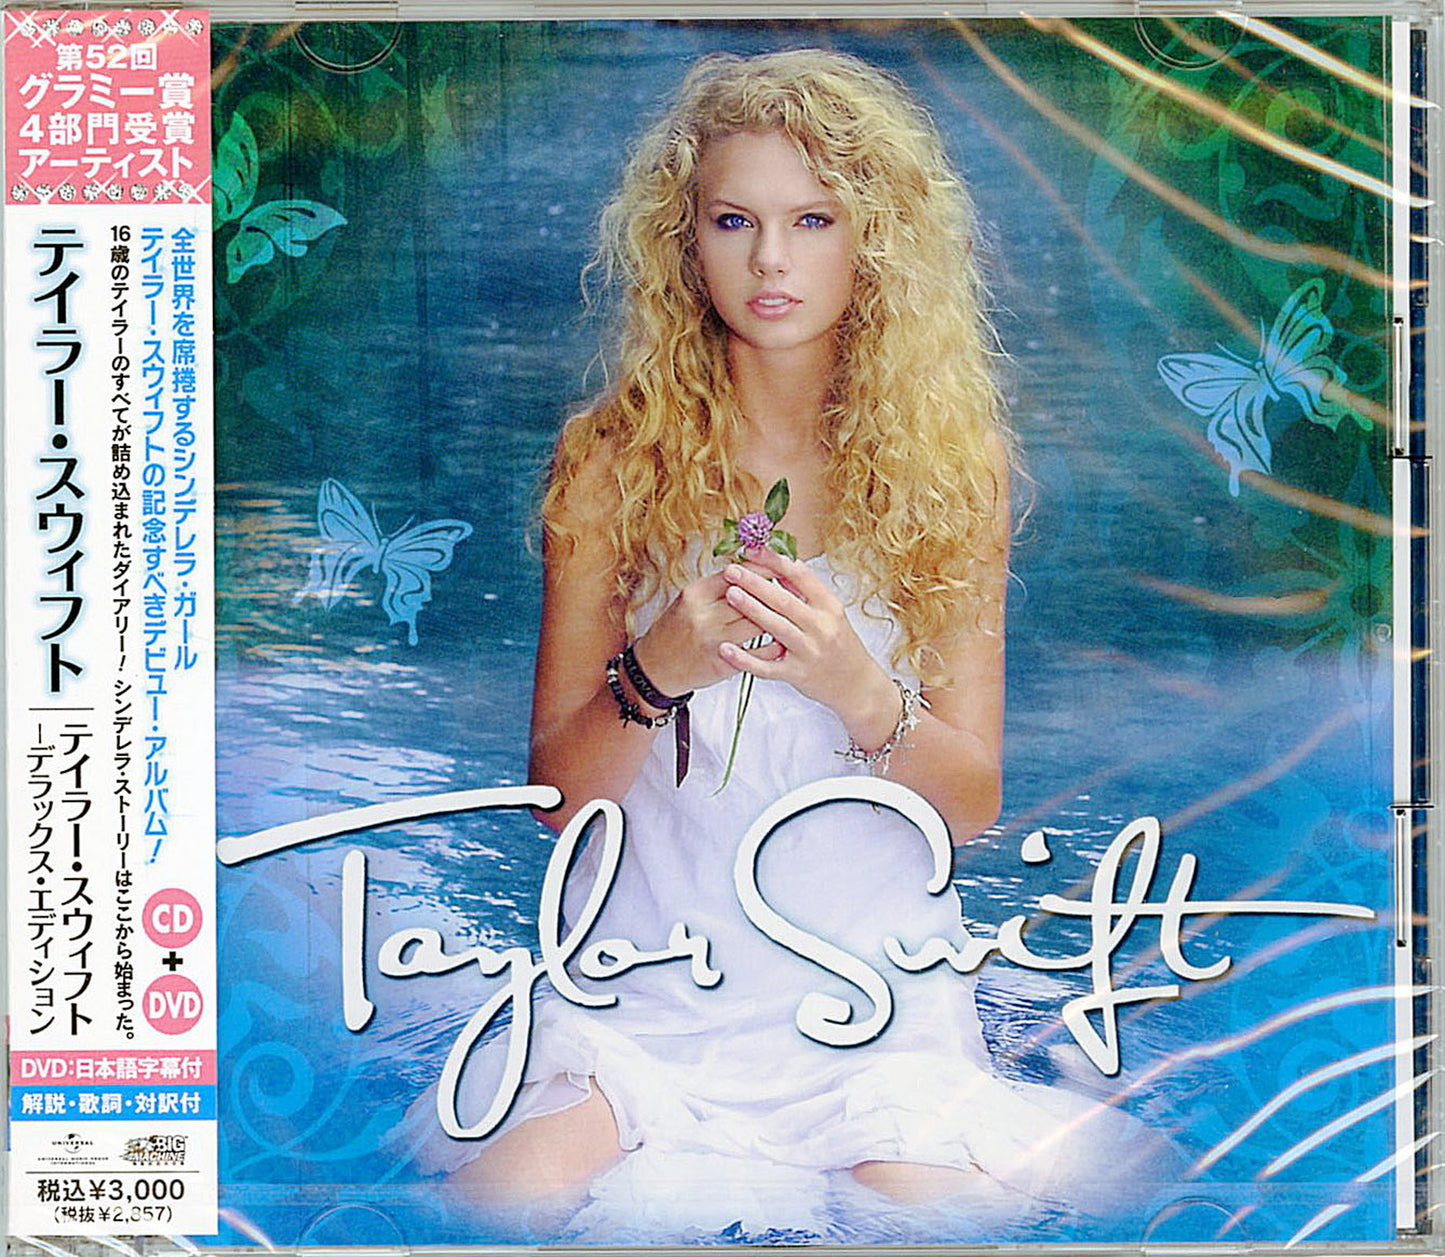 Taylor Swift - Taylor Swift Deluxe Edition - Japan  CD+DVD Limited Edition